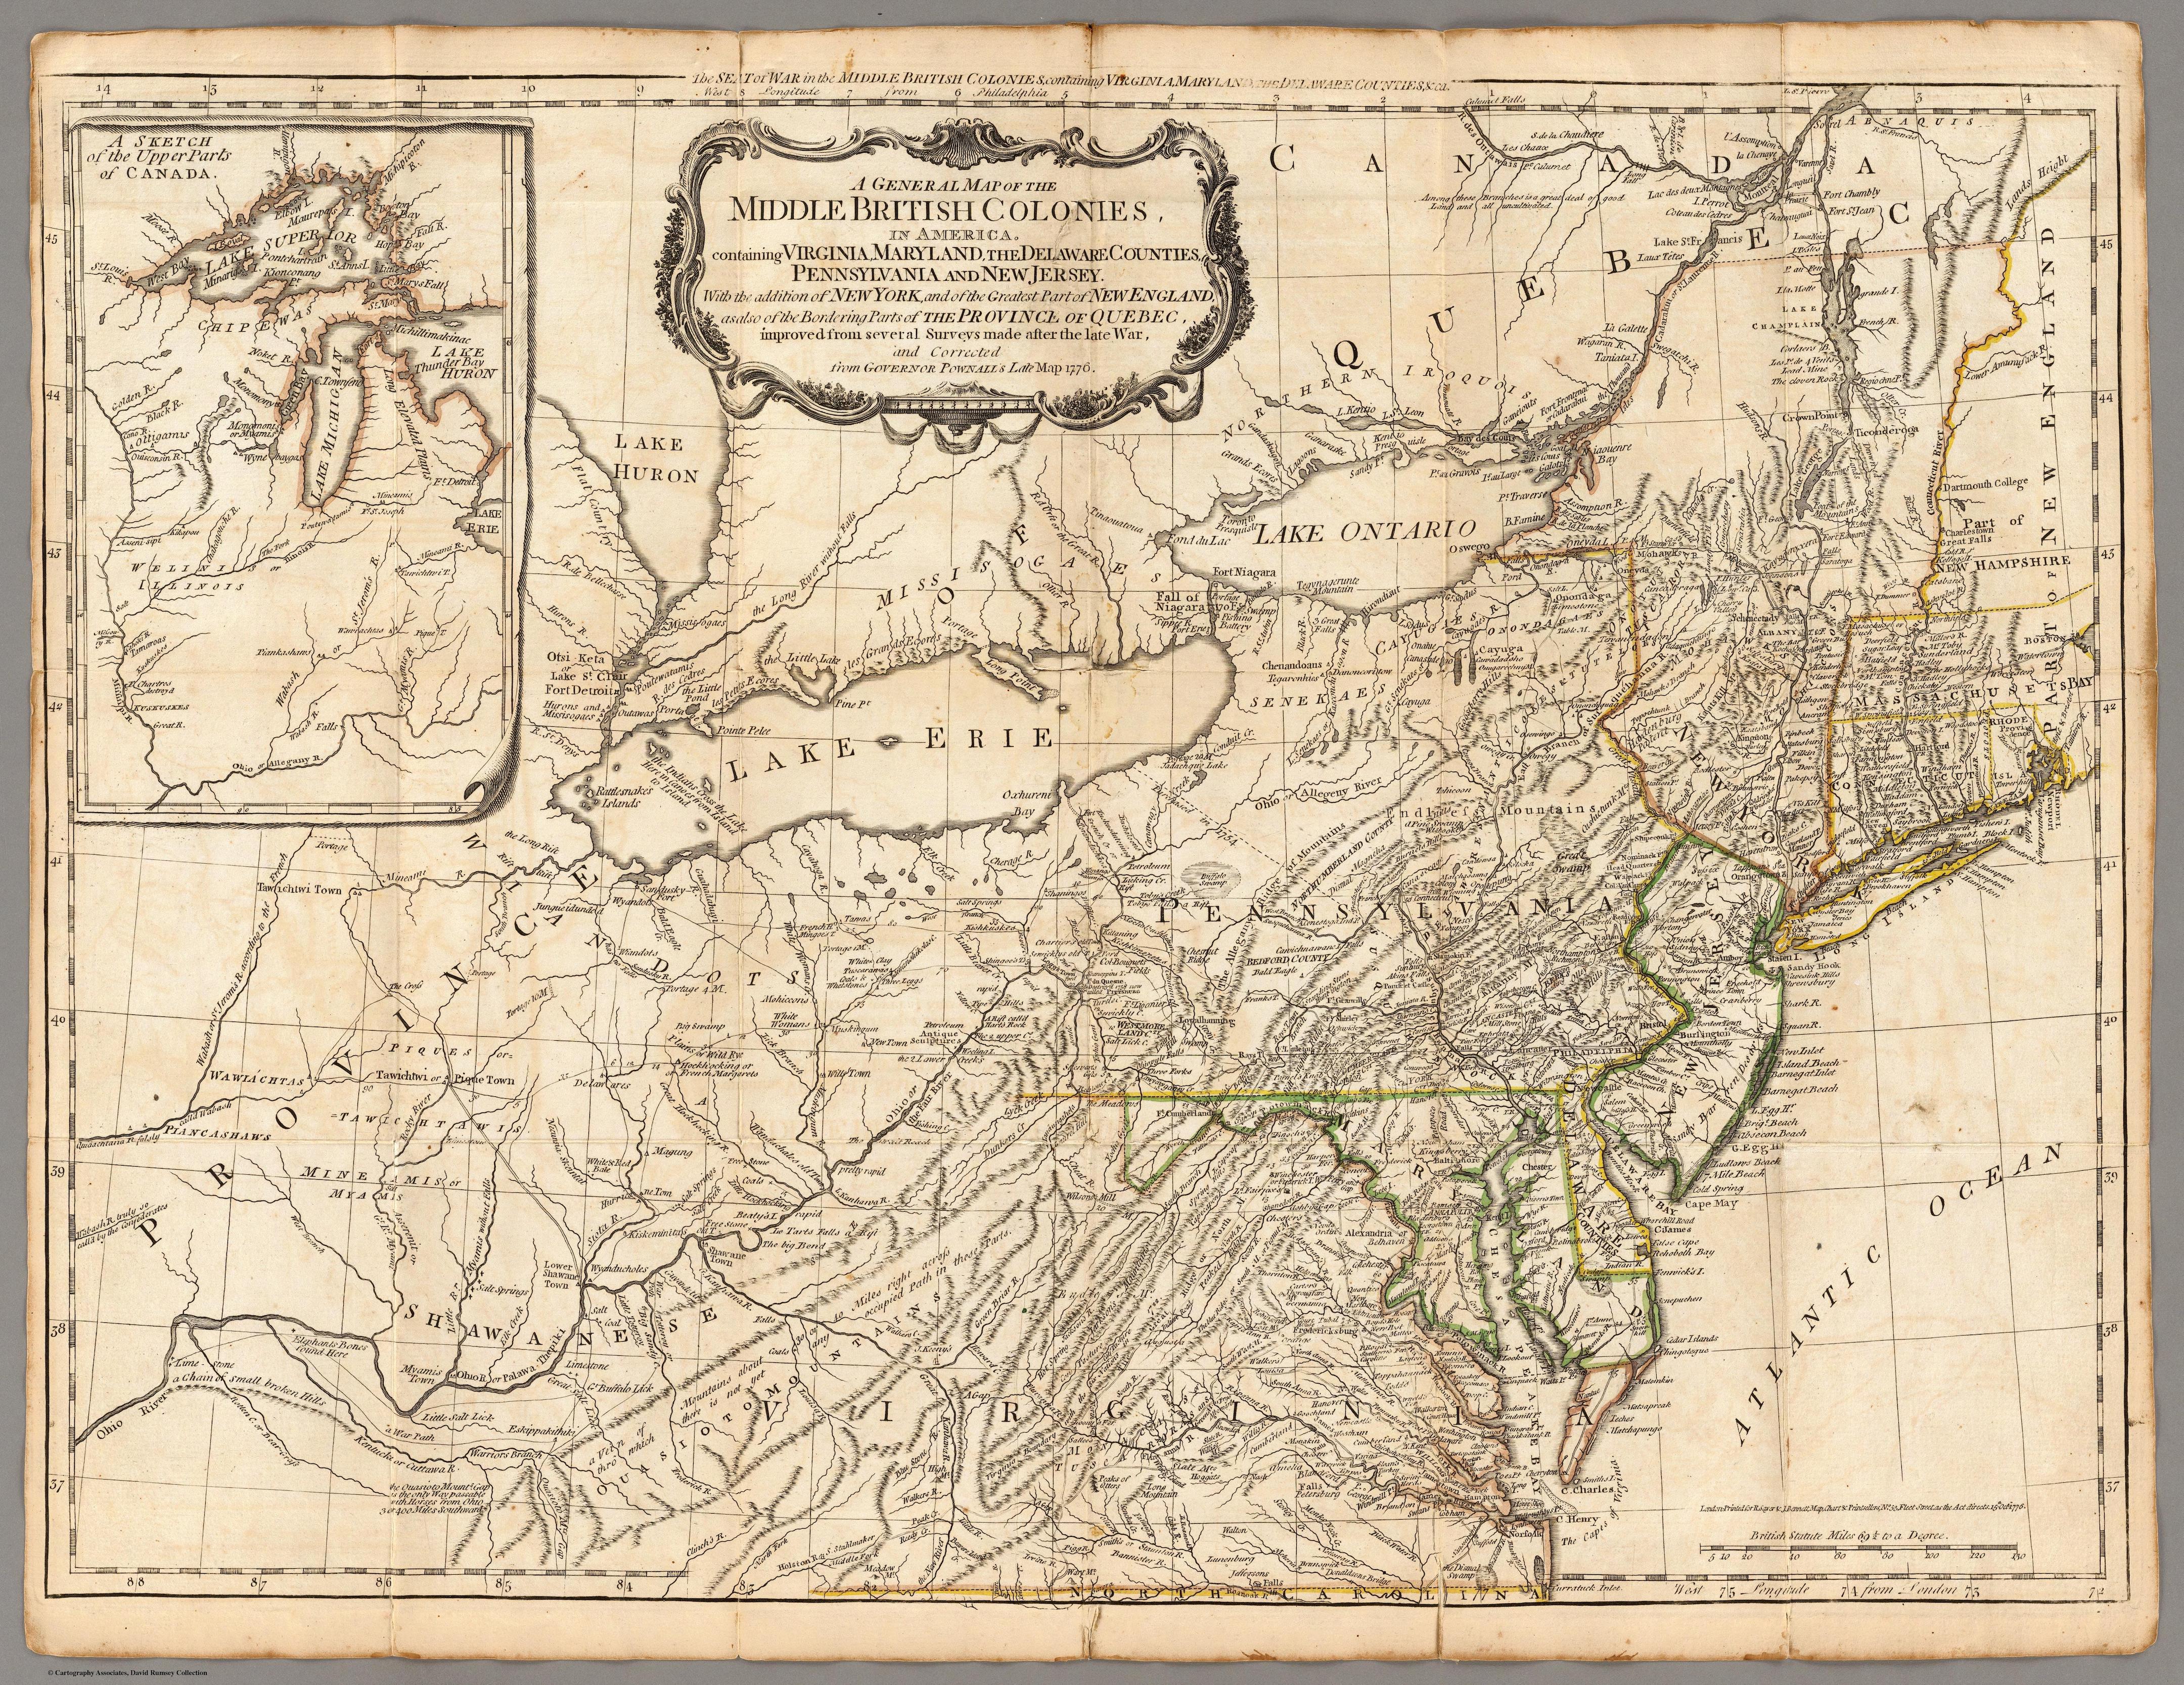 1776 General-Map-of-the-Middle-British copy